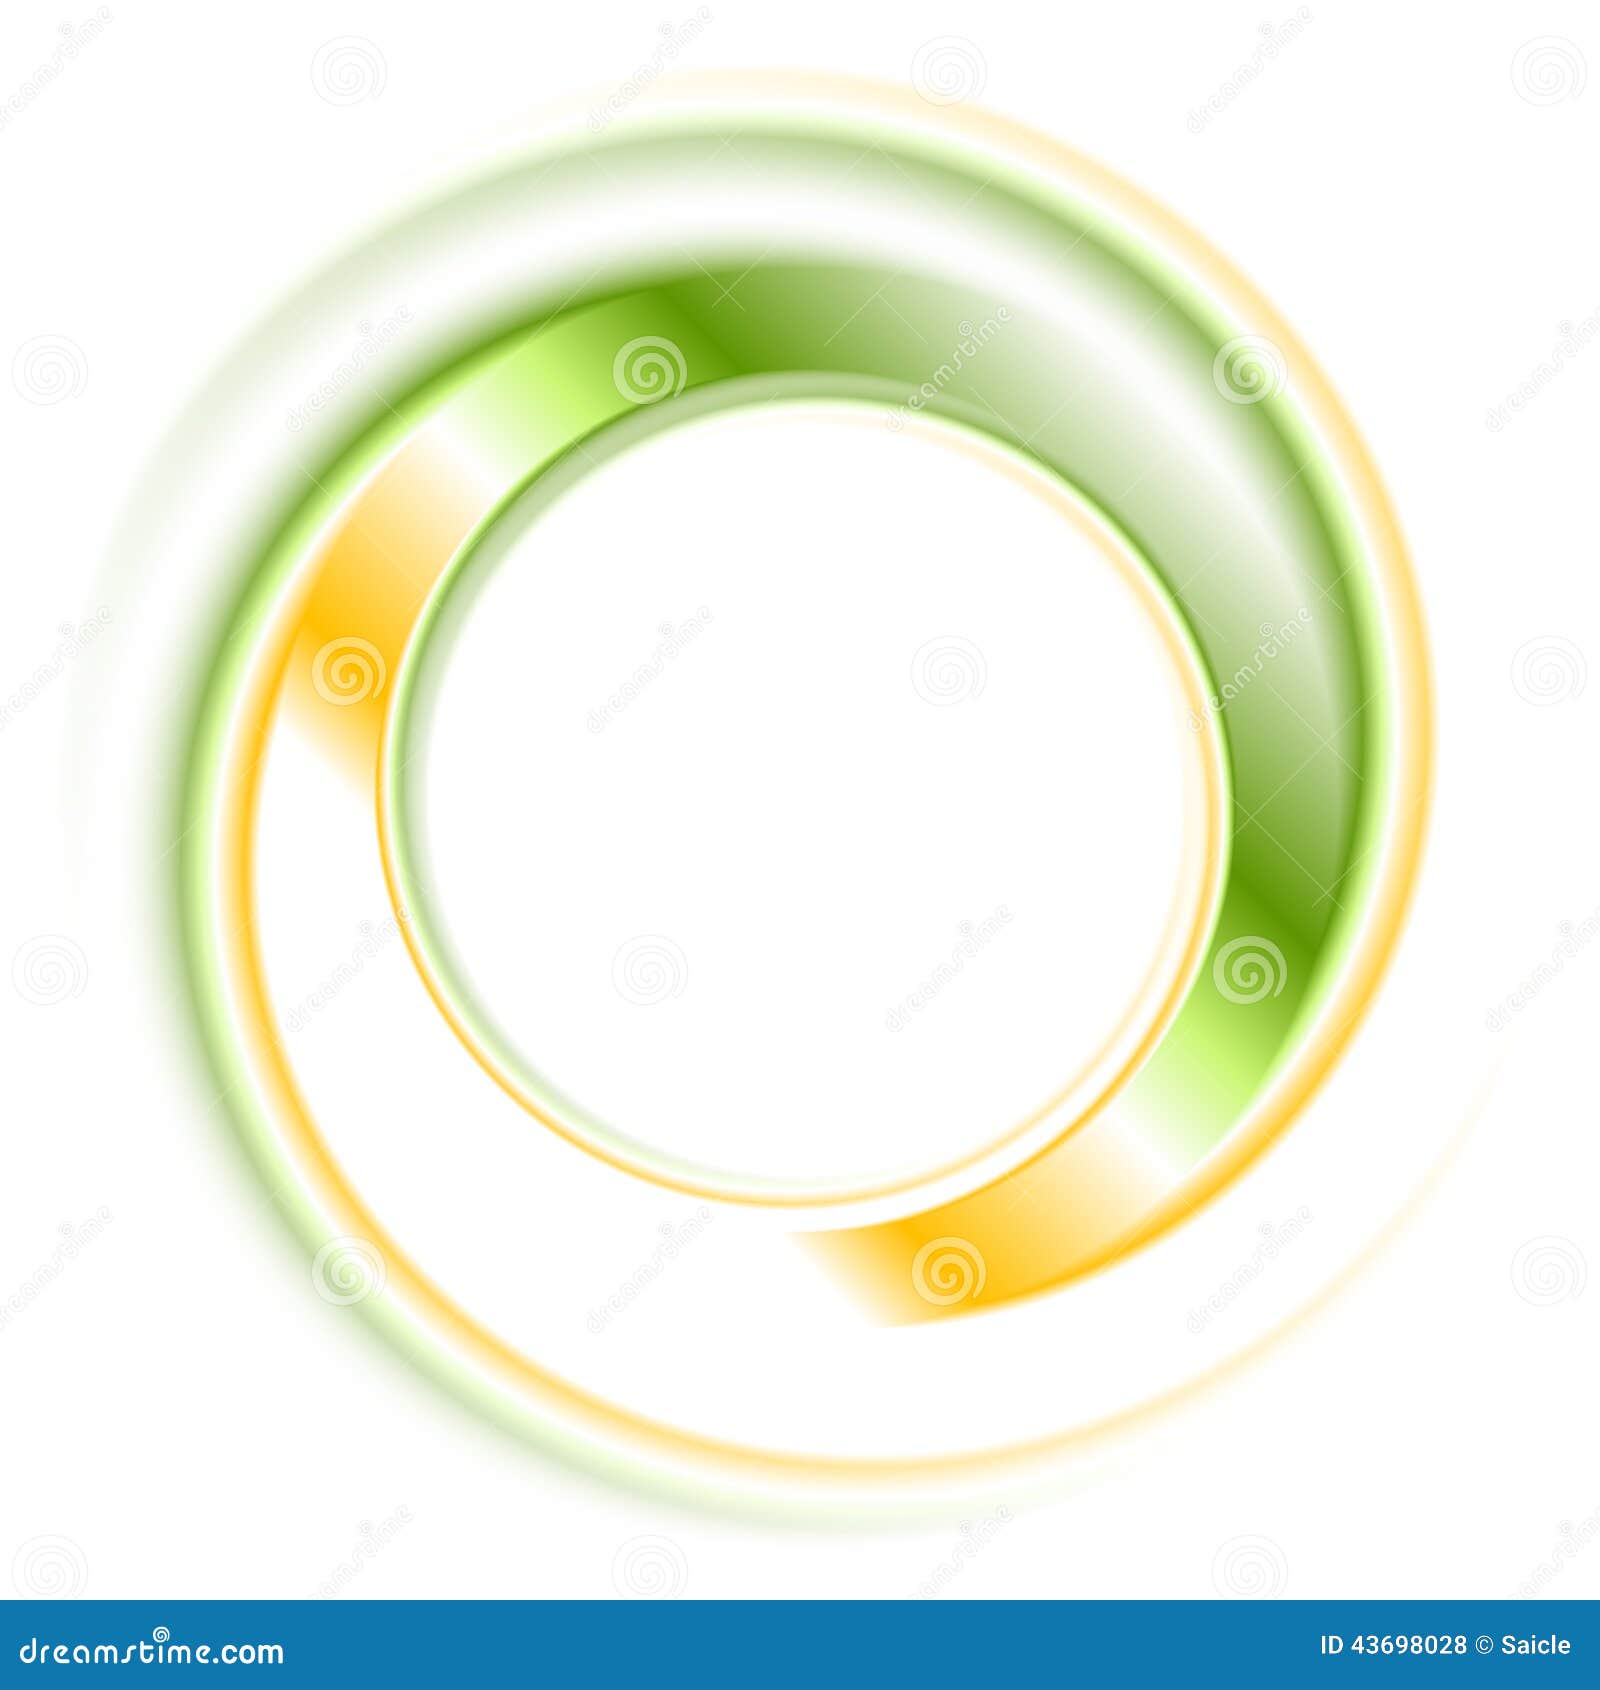 226,973 Ring Logo Images, Stock Photos, 3D objects, & Vectors | Shutterstock